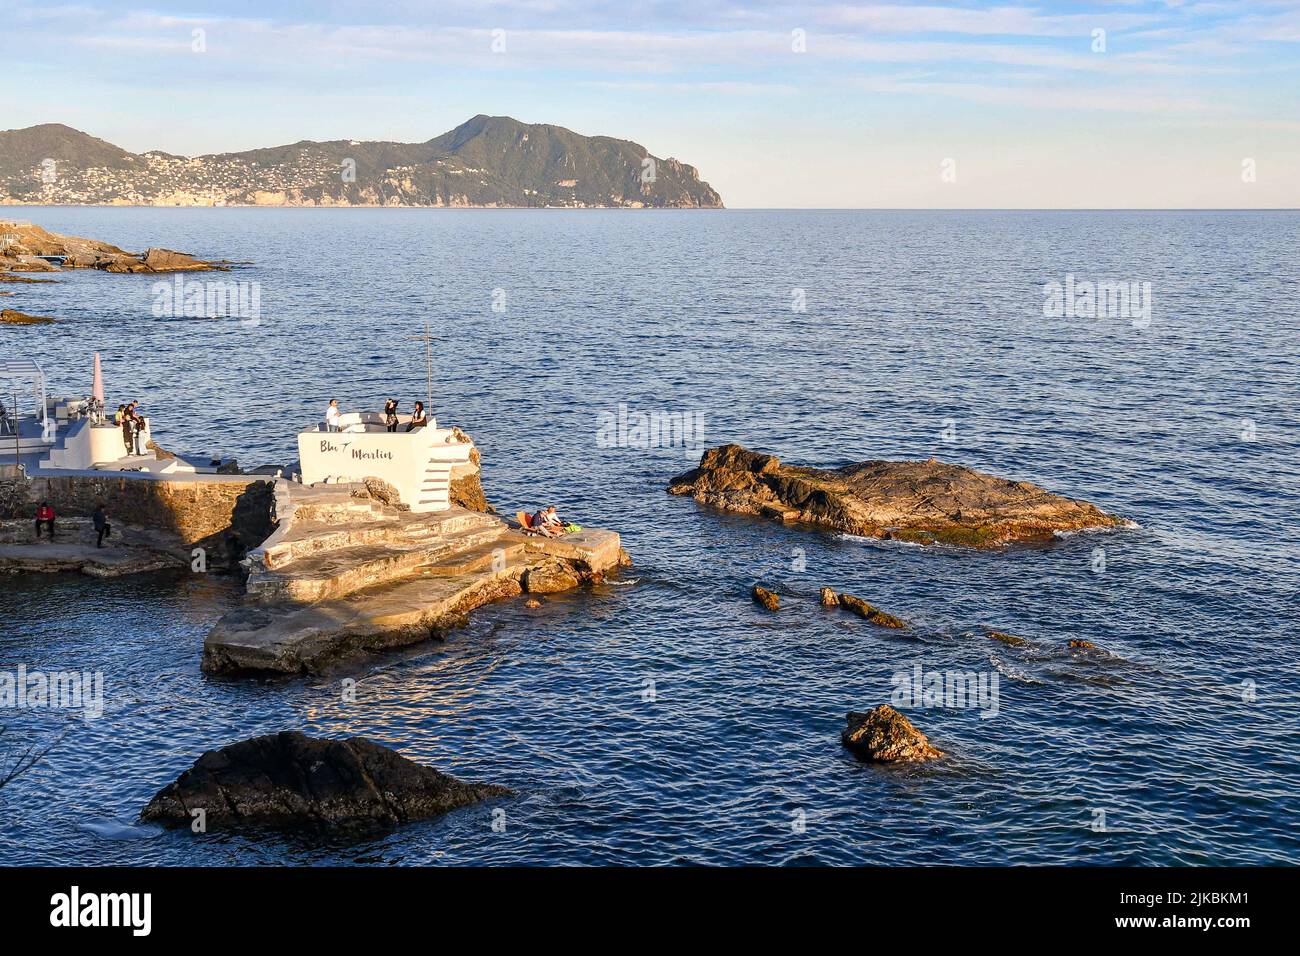 View of the Paradise Gulf with people in an outdoor cafè on a cliff of the Anita Garibaldi Promenade and the Promontory of Portofino, Nervi, Genoa Stock Photo